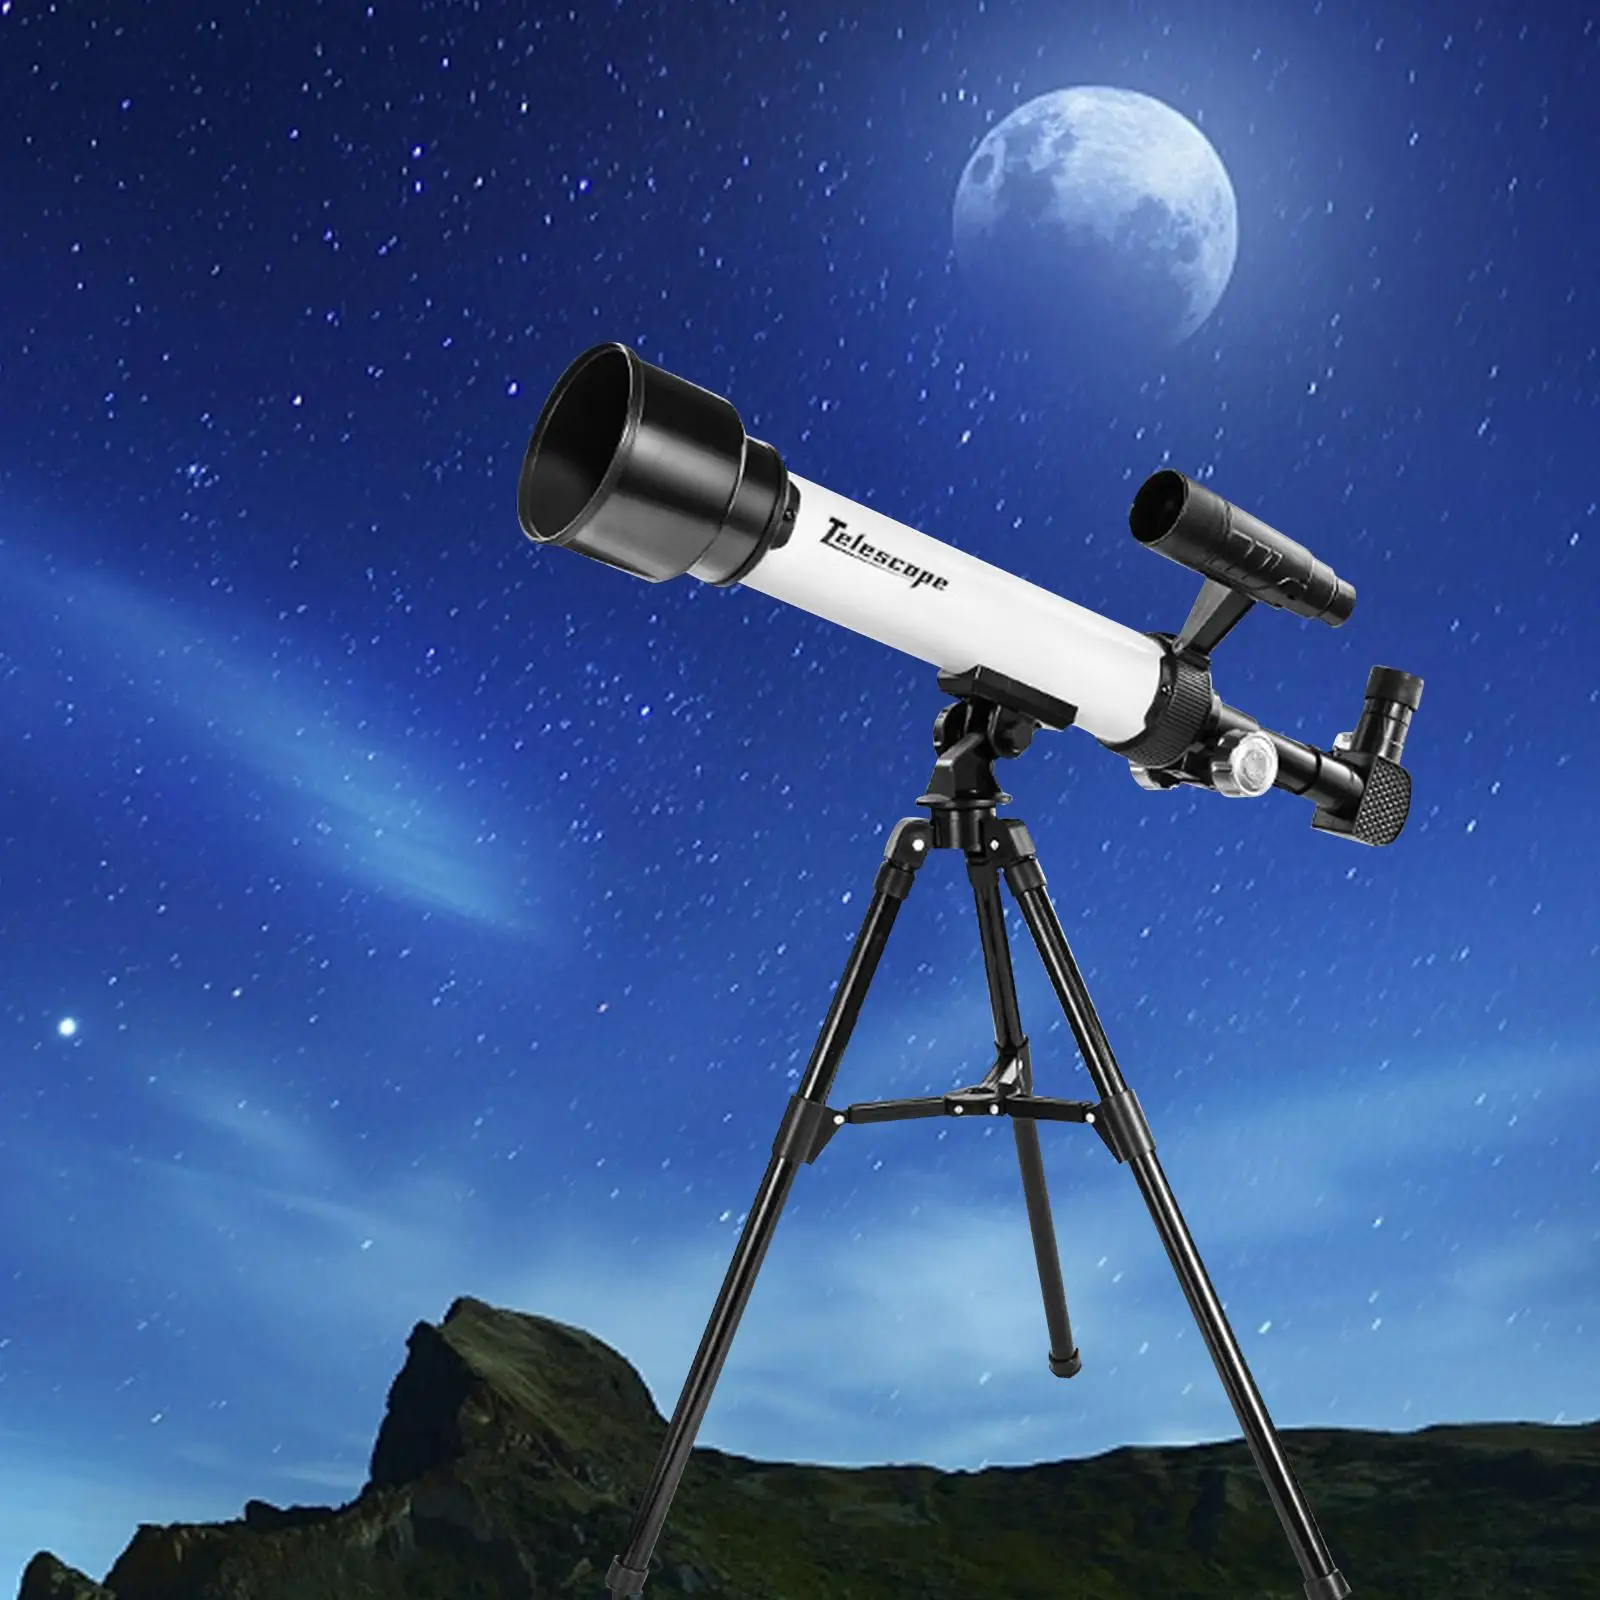 Astronomical Telescope Refracting Telescope for Beginners Portable with Find